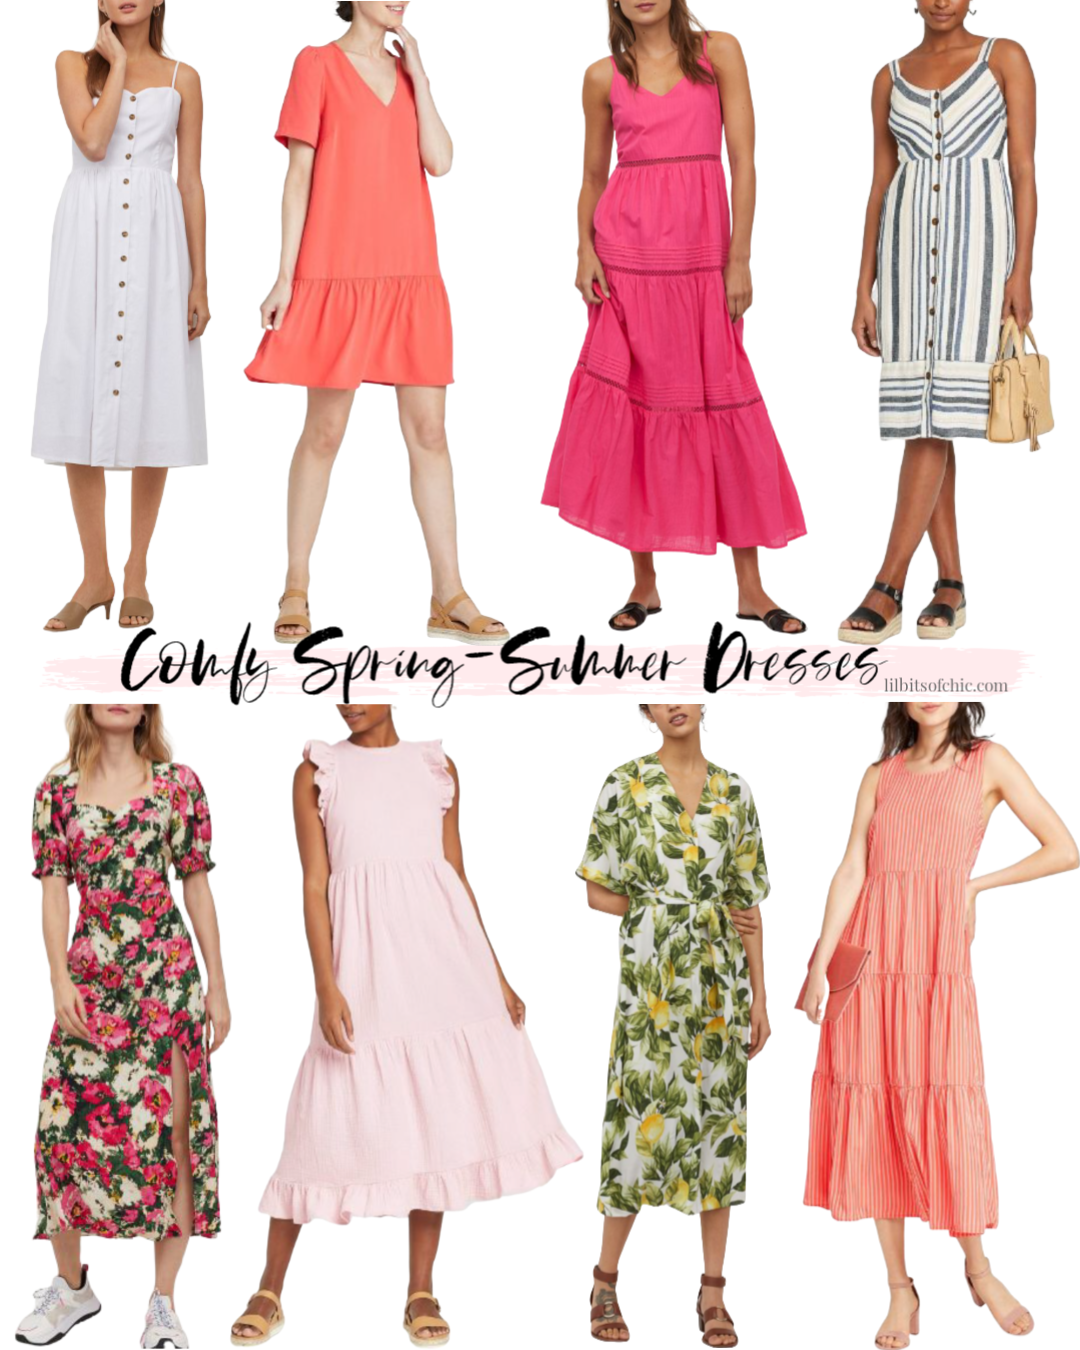 Comfy Spring and Summer Dresses under $40, dresses for quarantine, dresses for in and out of the house